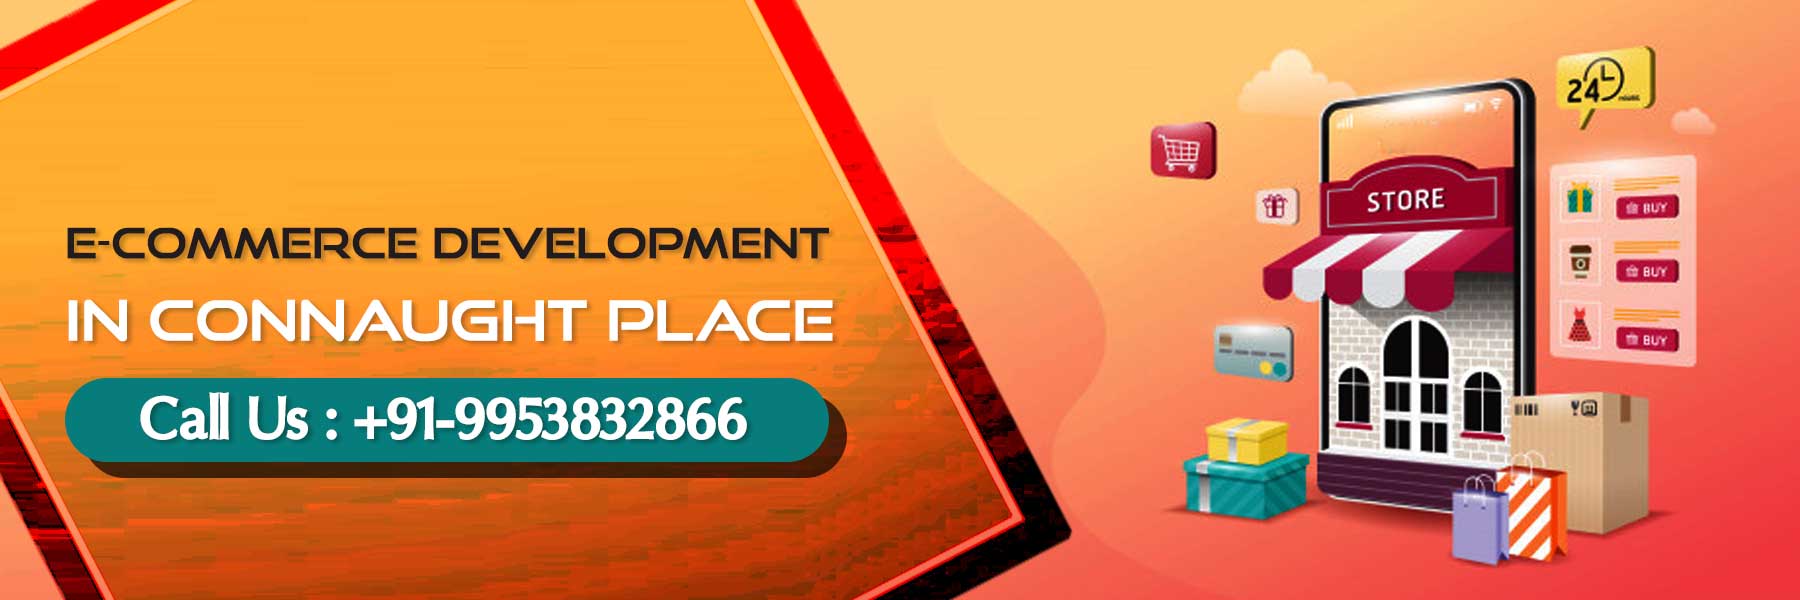 ecommerce development in Connaught Place